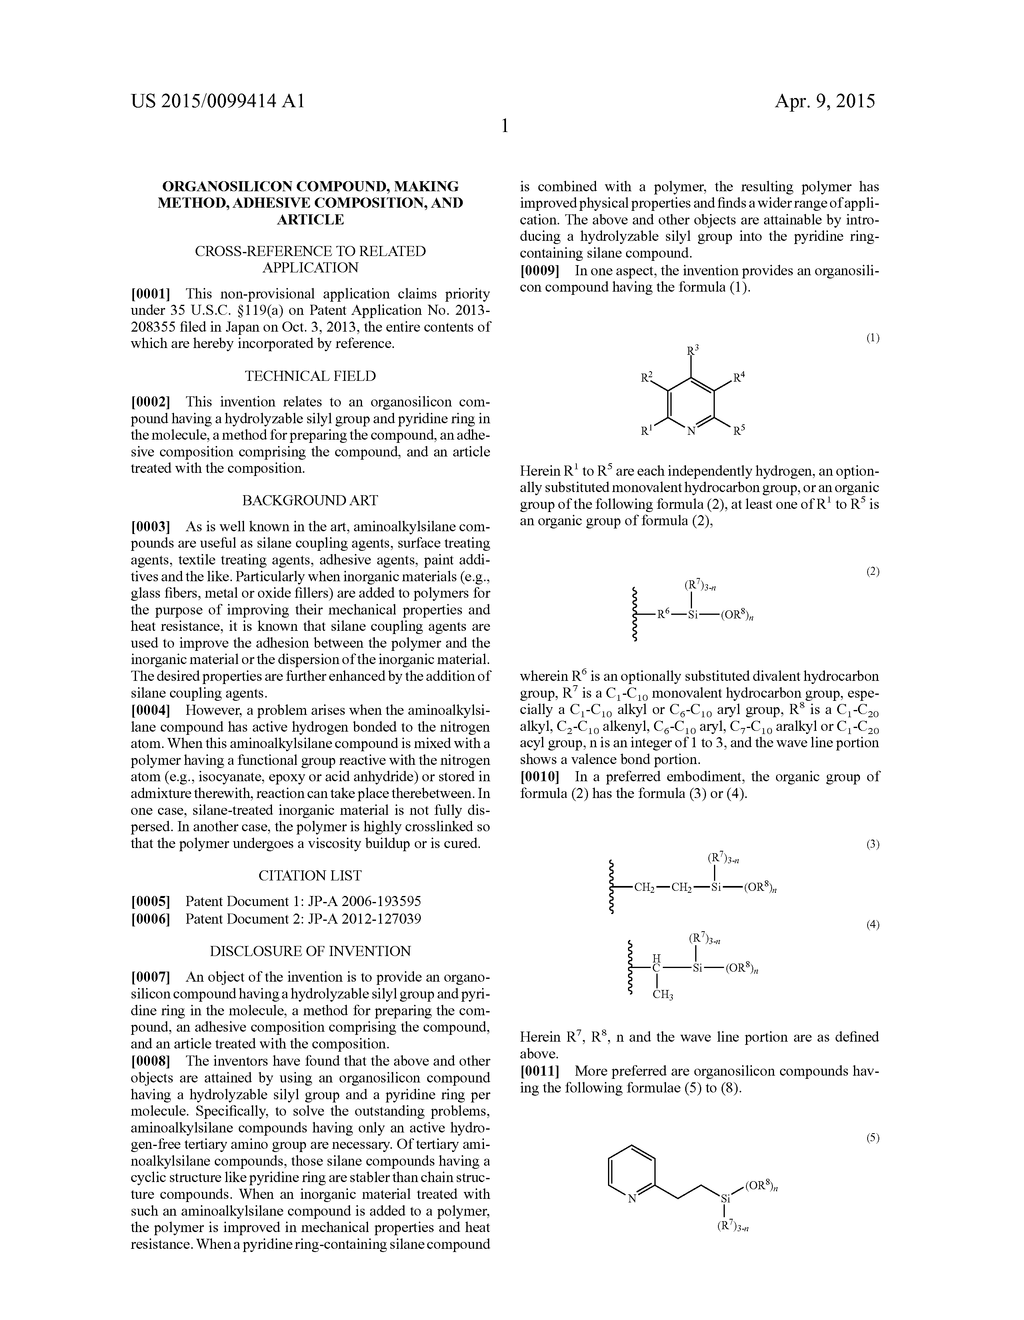 ORGANOSILICON COMPOUND, MAKING METHOD, ADHESIVE COMPOSITION, AND ARTICLE - diagram, schematic, and image 02